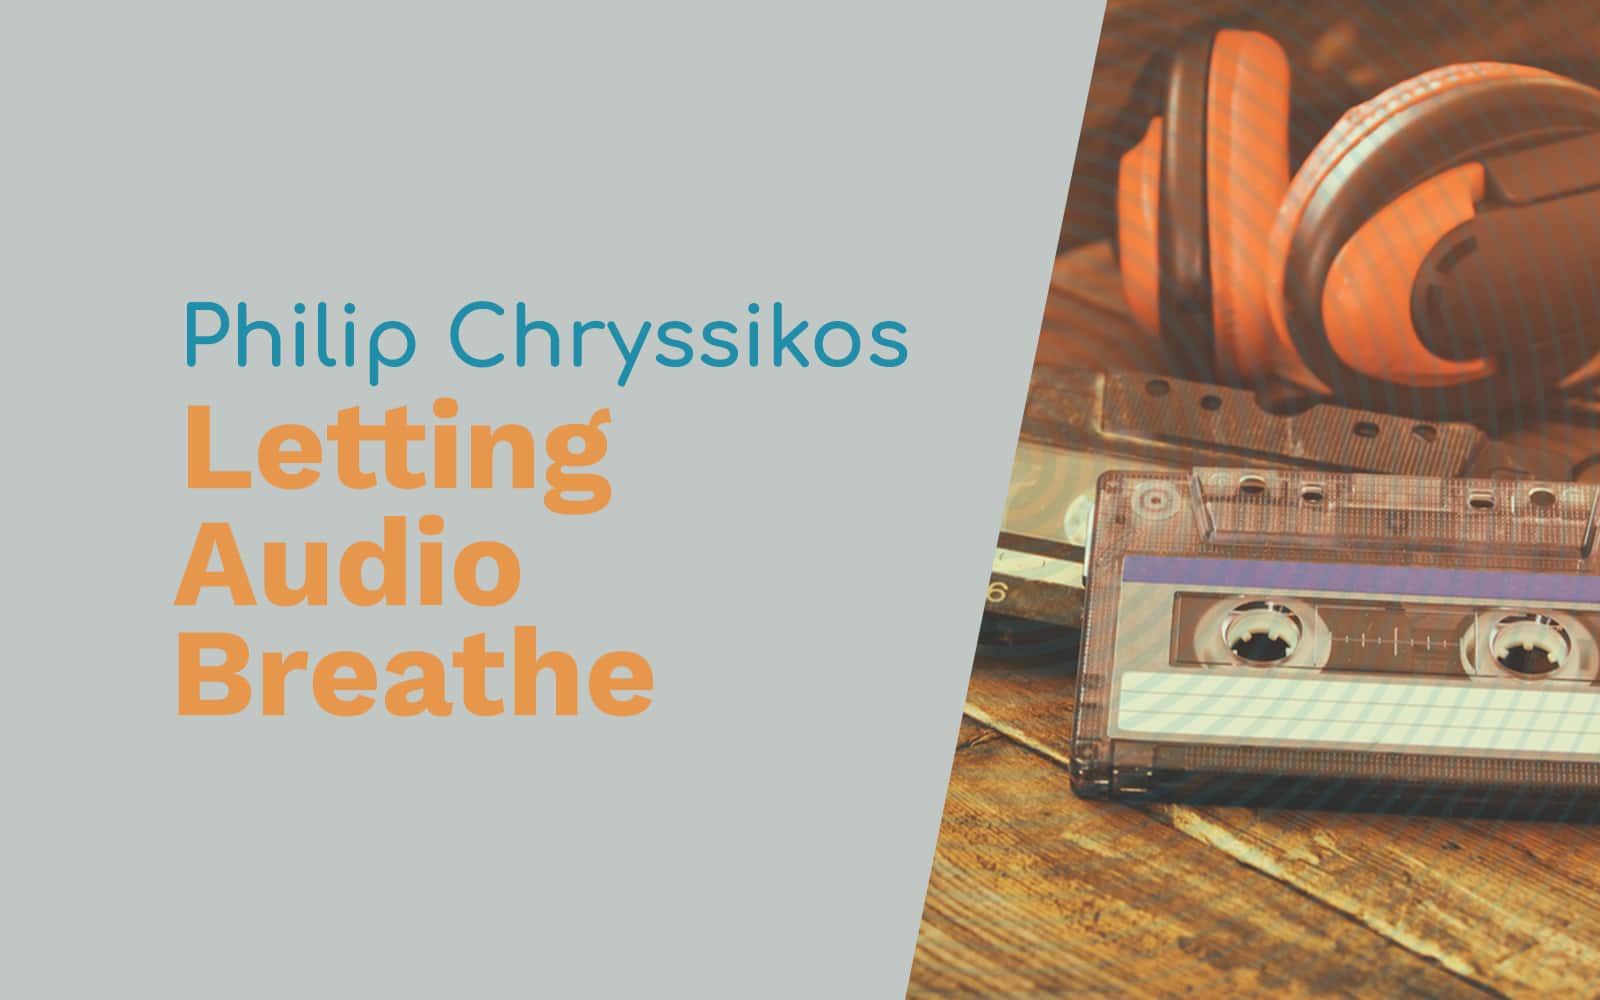 Philip Chryssikos: Audio Cassette Tapes, News Bulletins, and Letting Audio Breathe Adobe Audition Podcast  Music Radio Creative